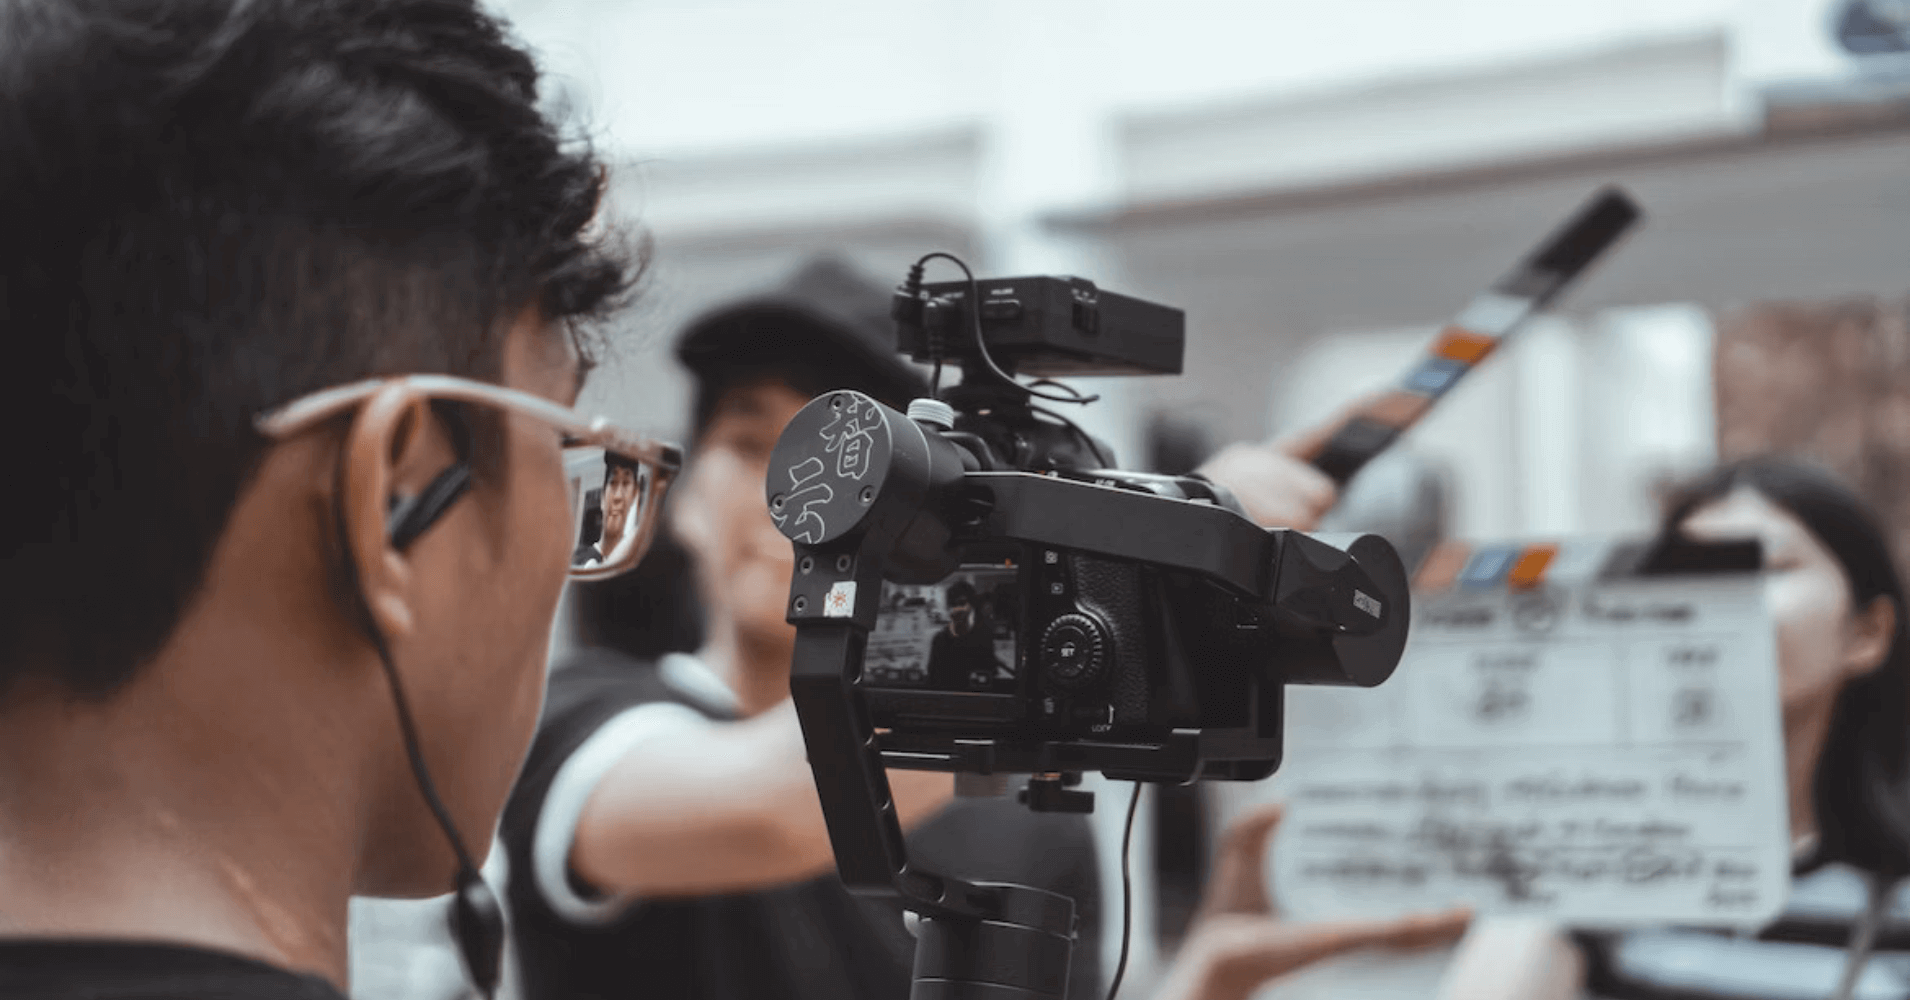 8 Ways to Make Your Video Project More Professional